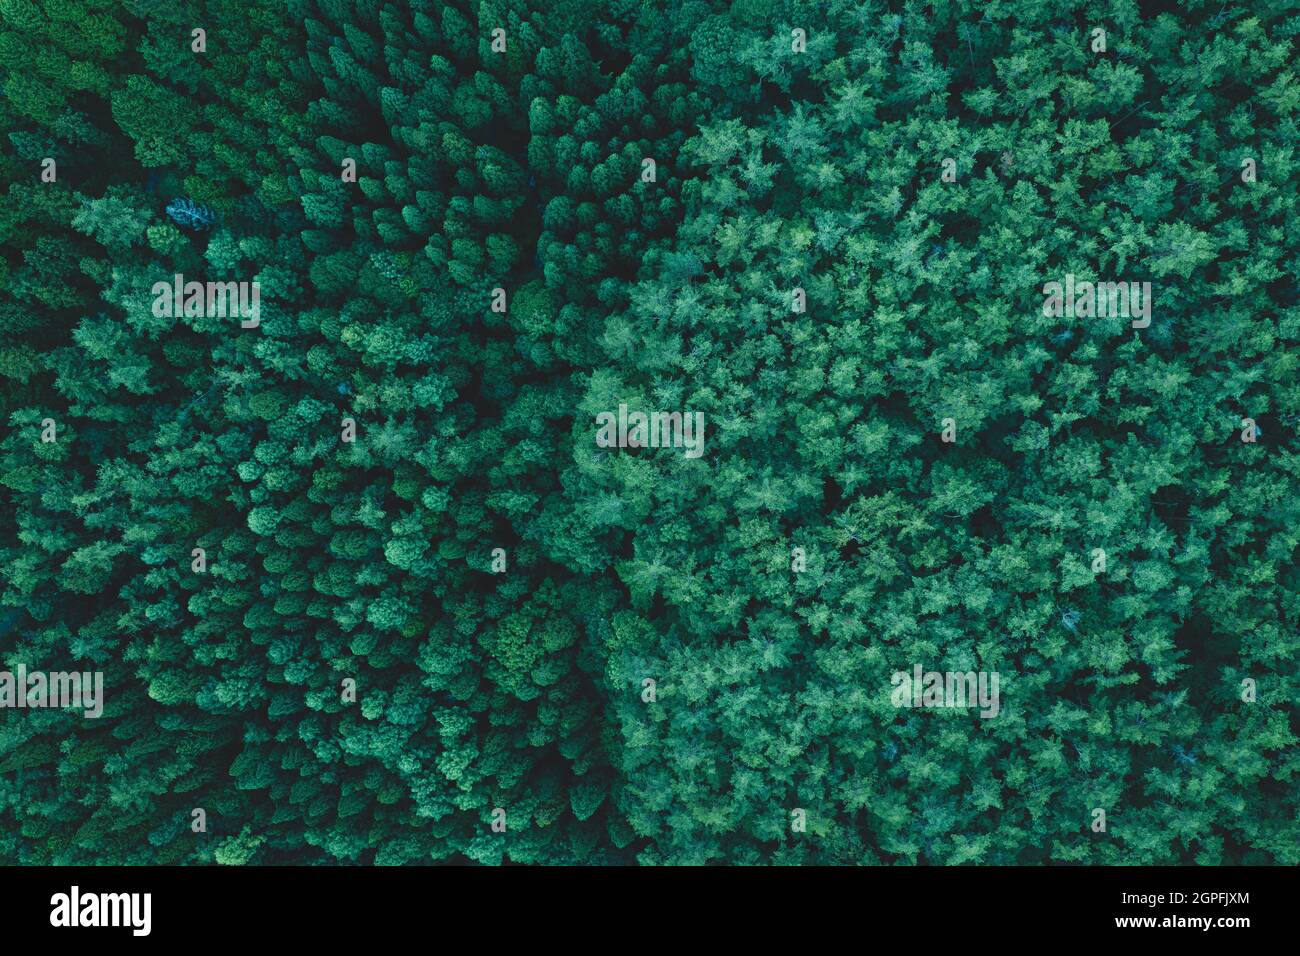 Aerial image of forest in Japan Stock Photo